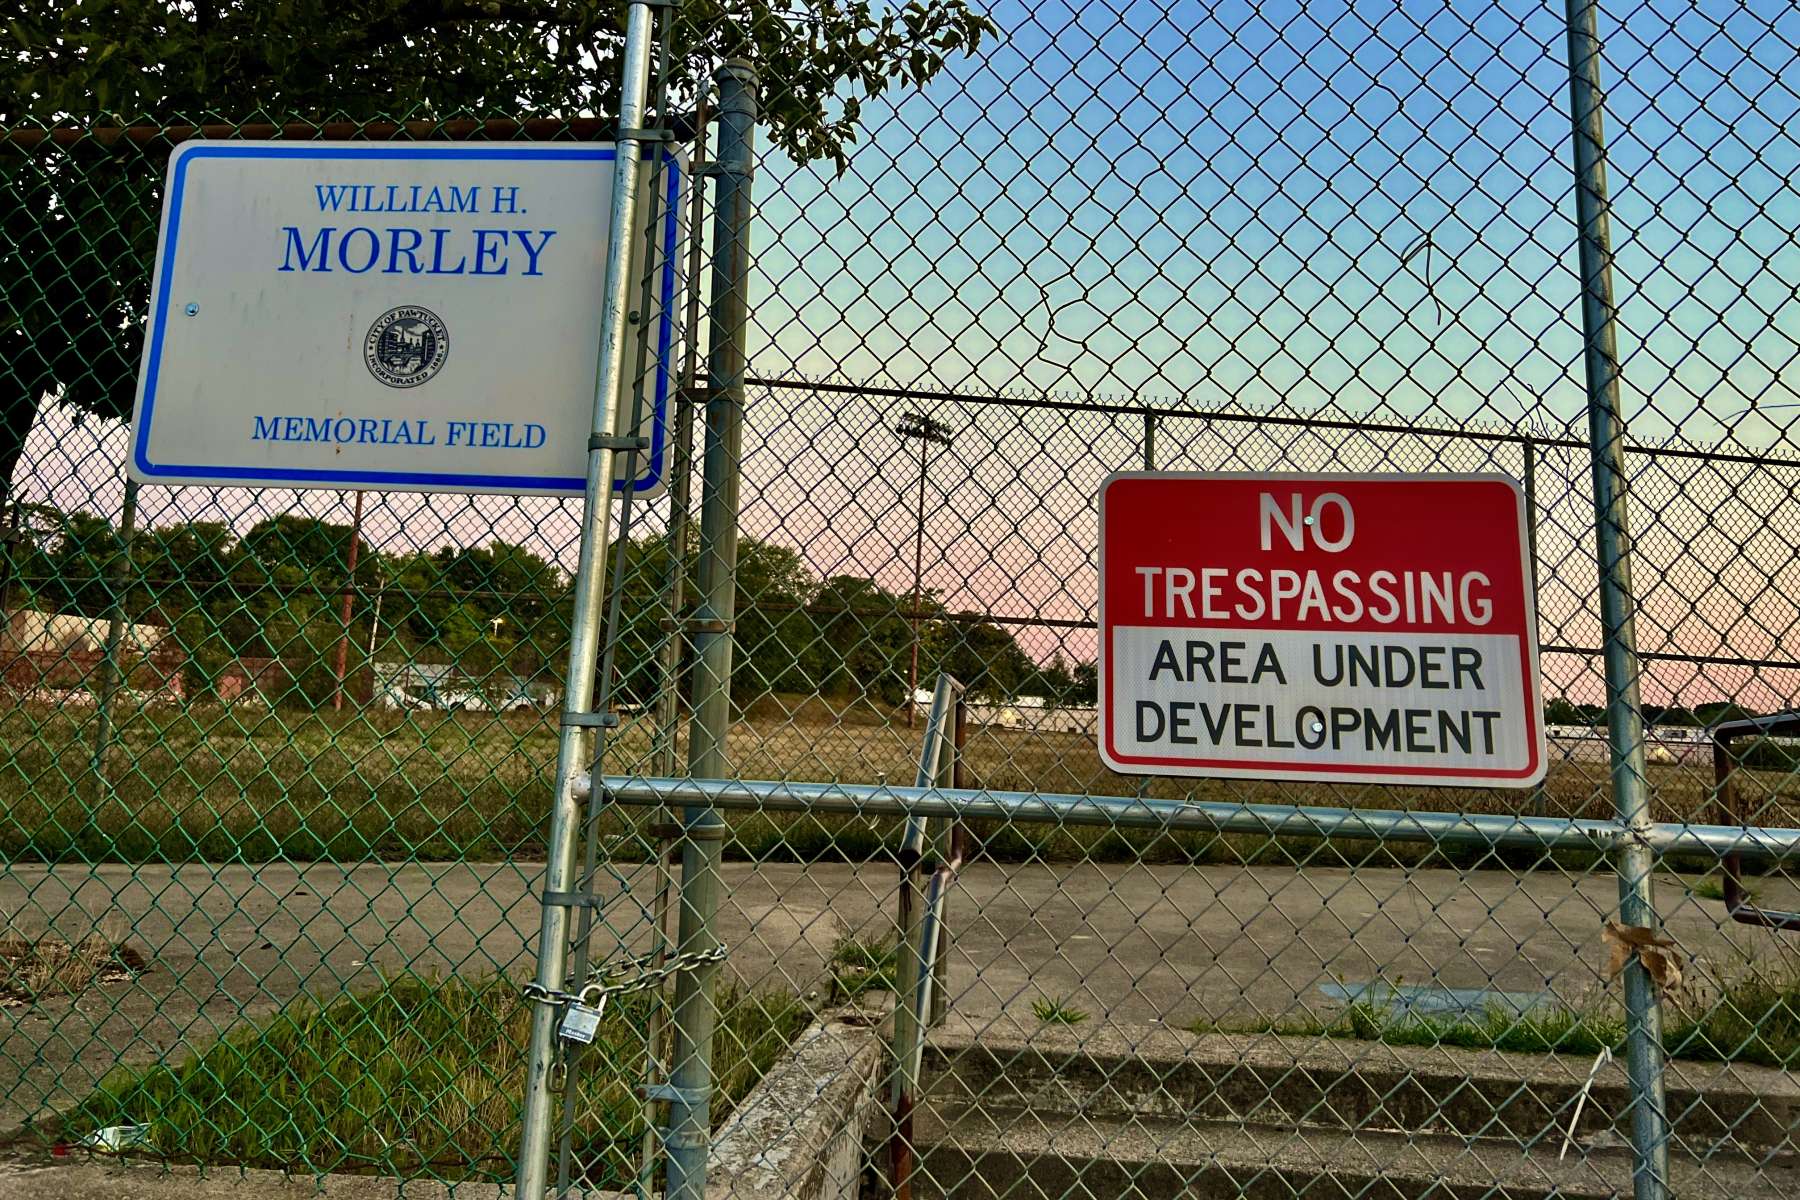 New data calls into question the soil testing done at Morley Field by the developer, JK Equity